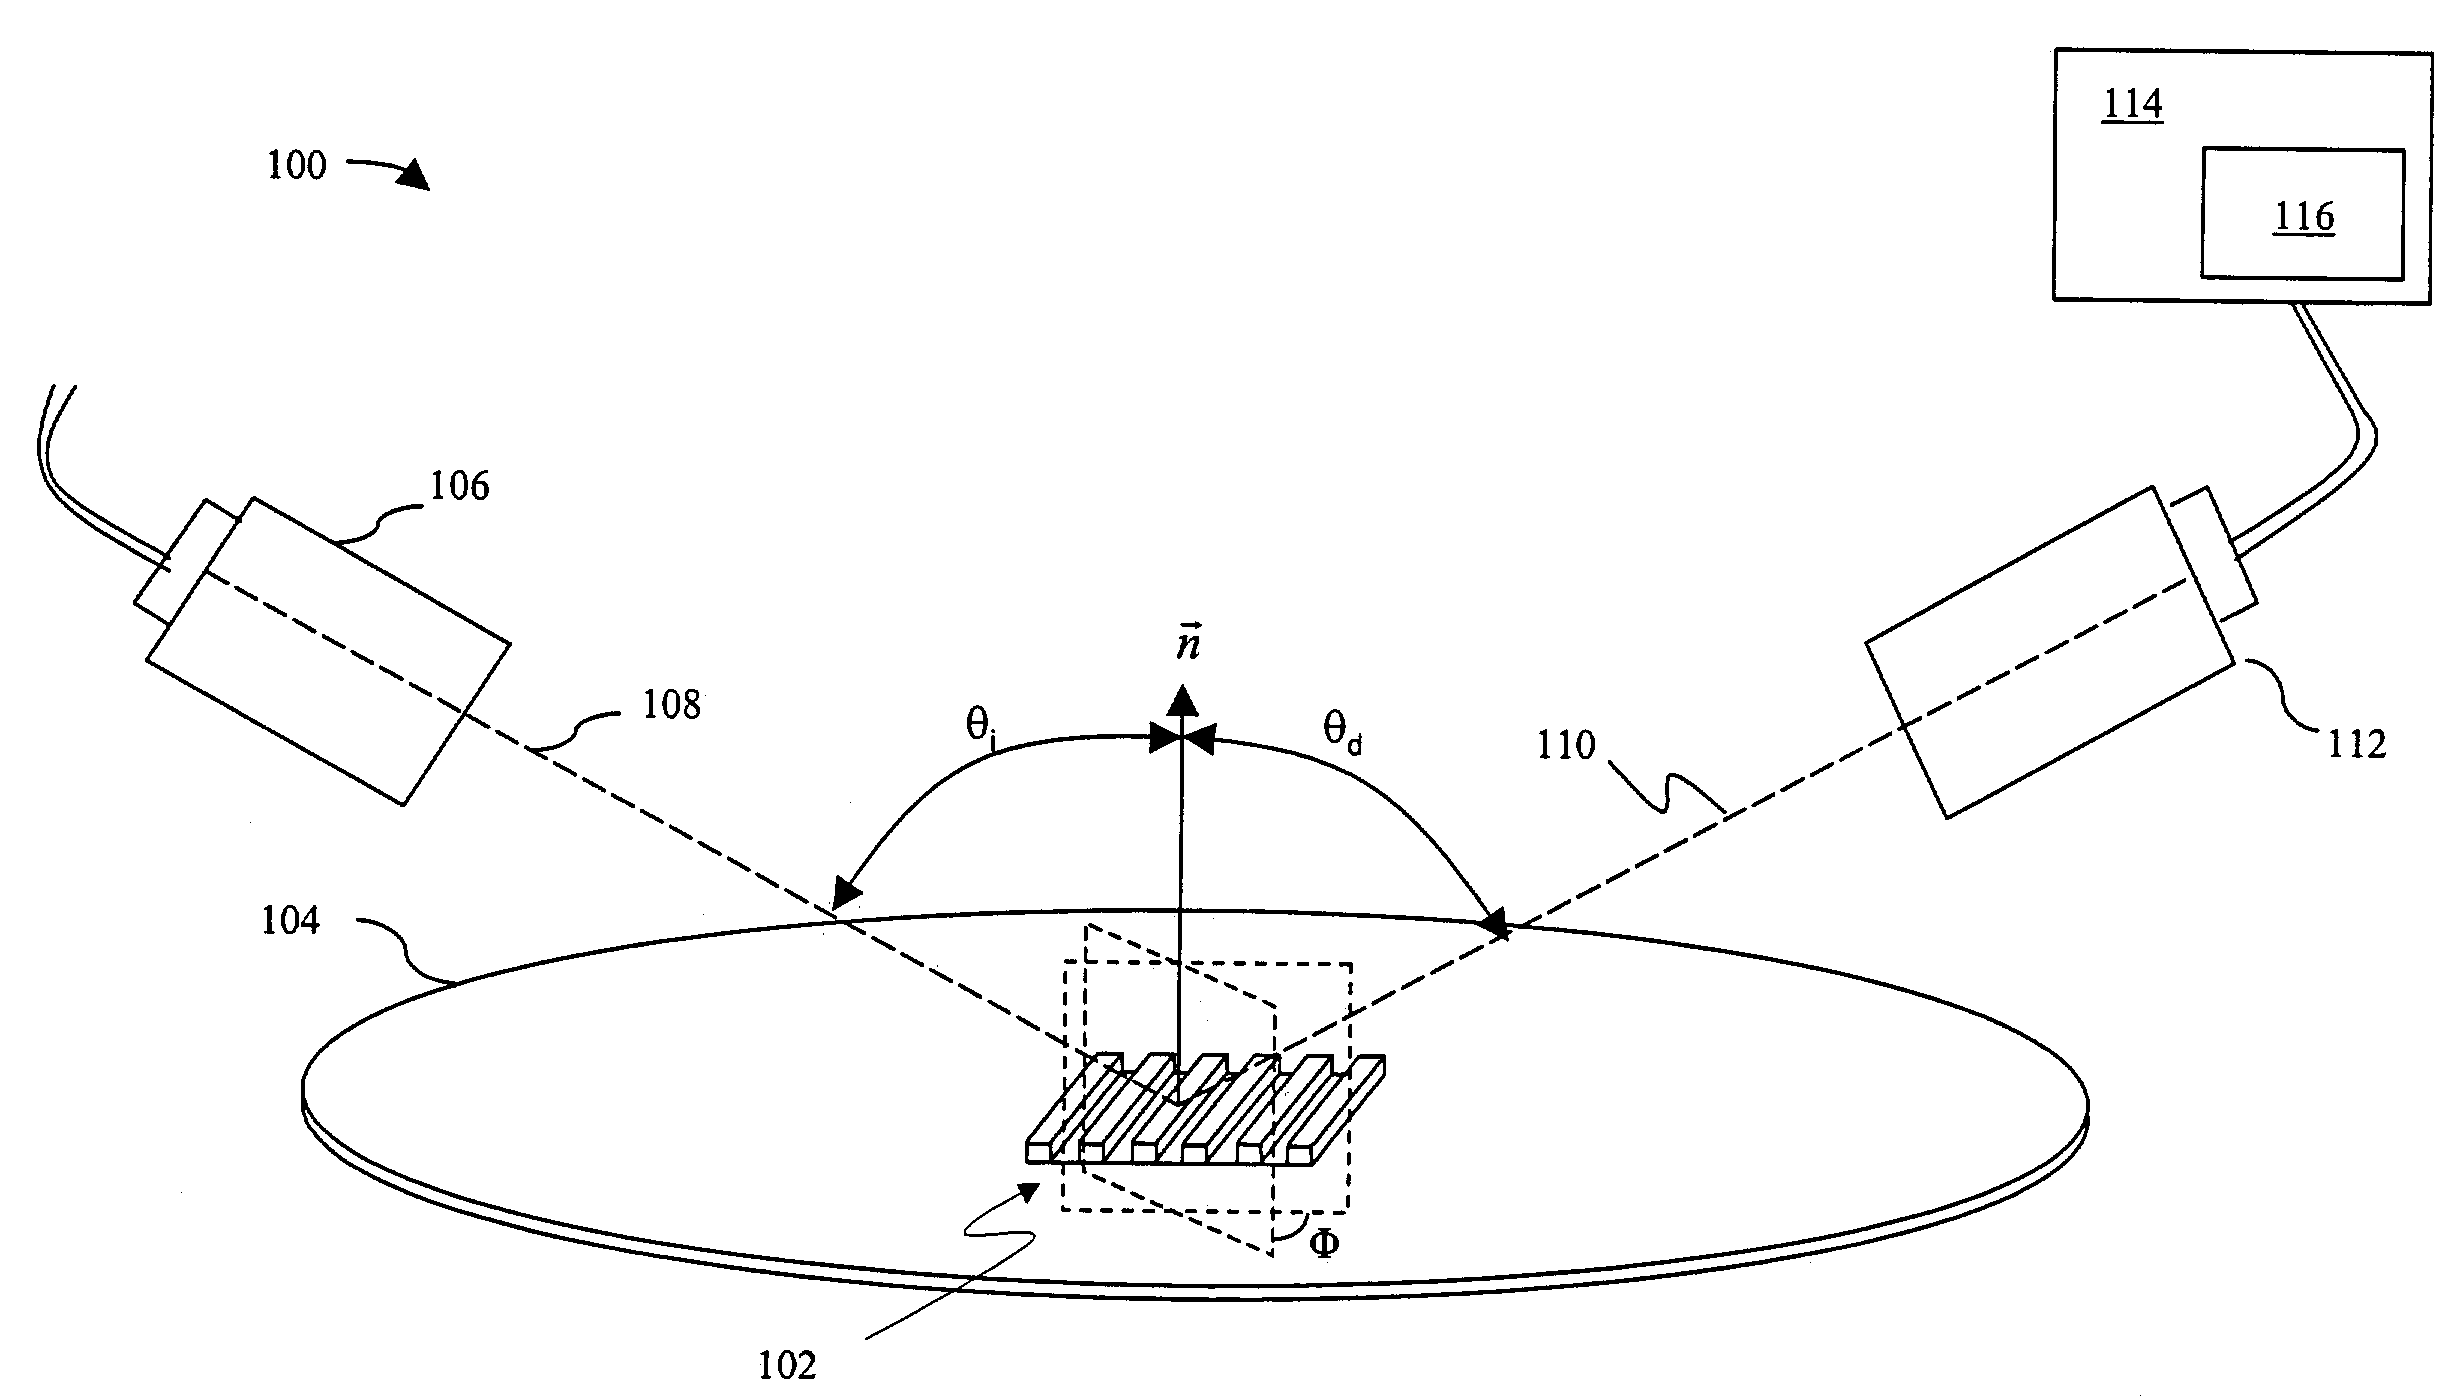 Generic interface for an optical metrology system